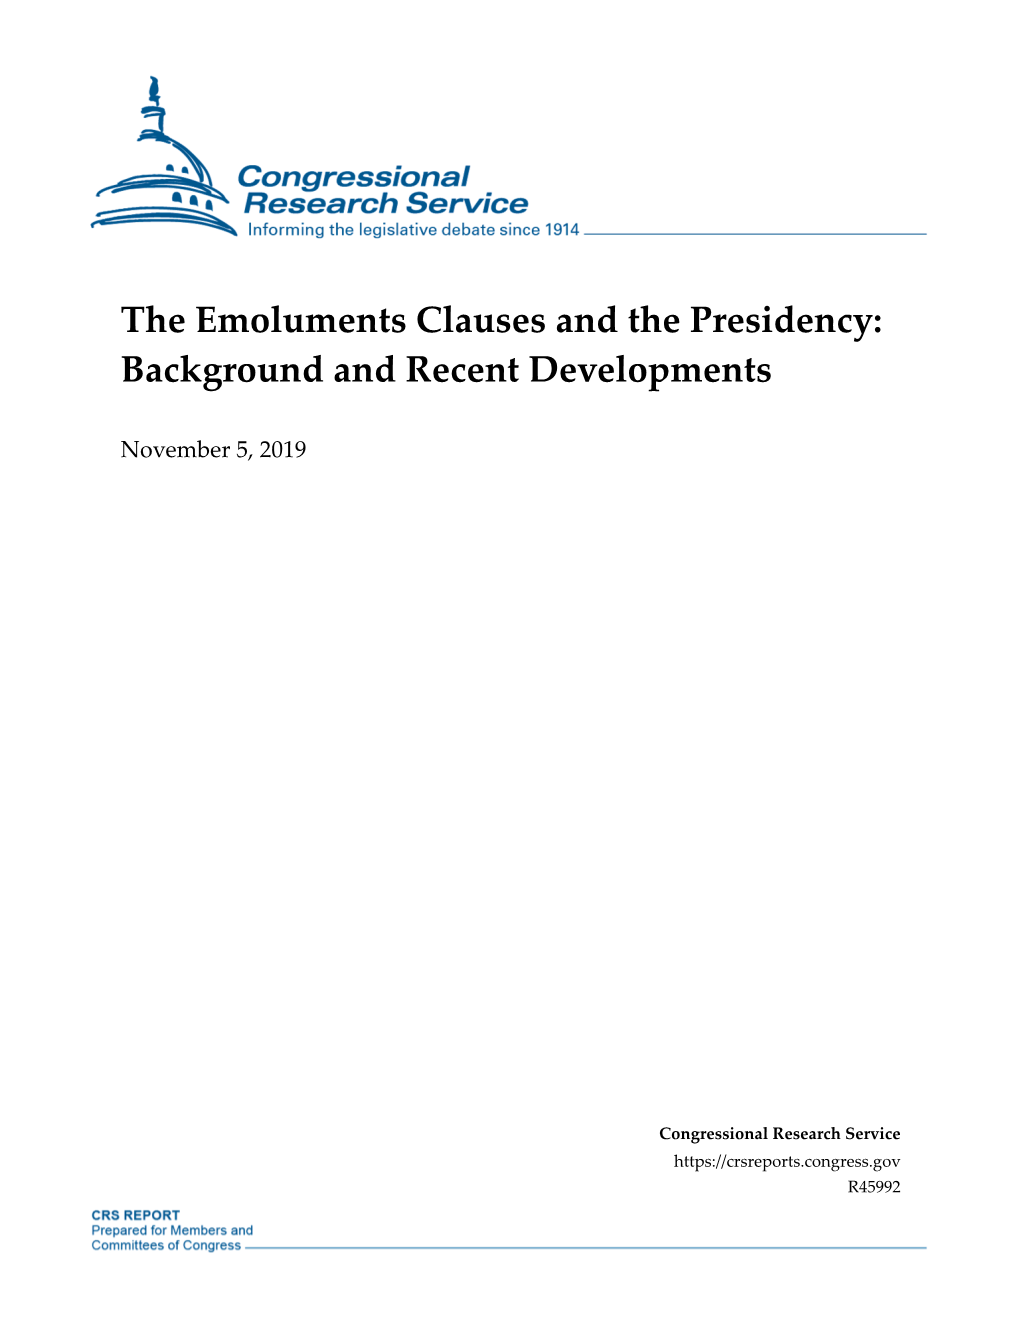 The Emoluments Clauses and the Presidency: Background and Recent Developments